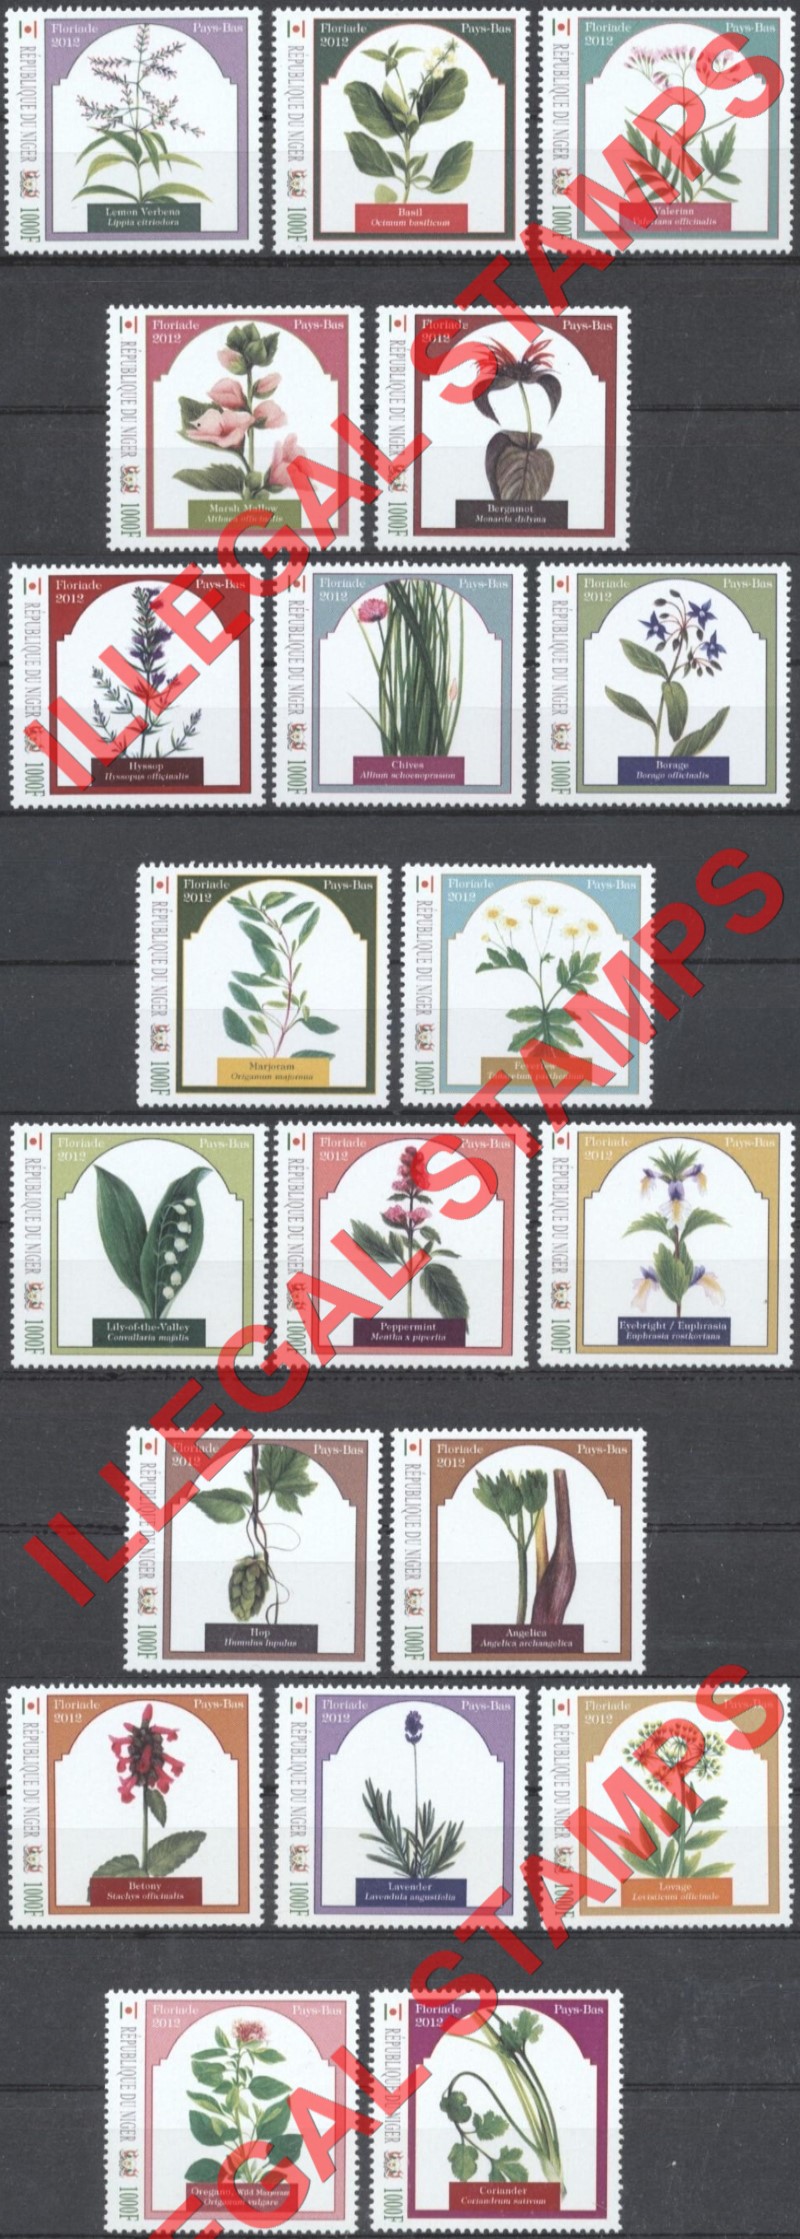 Niger 2012 Flowers Illegal Stamp Set of 20